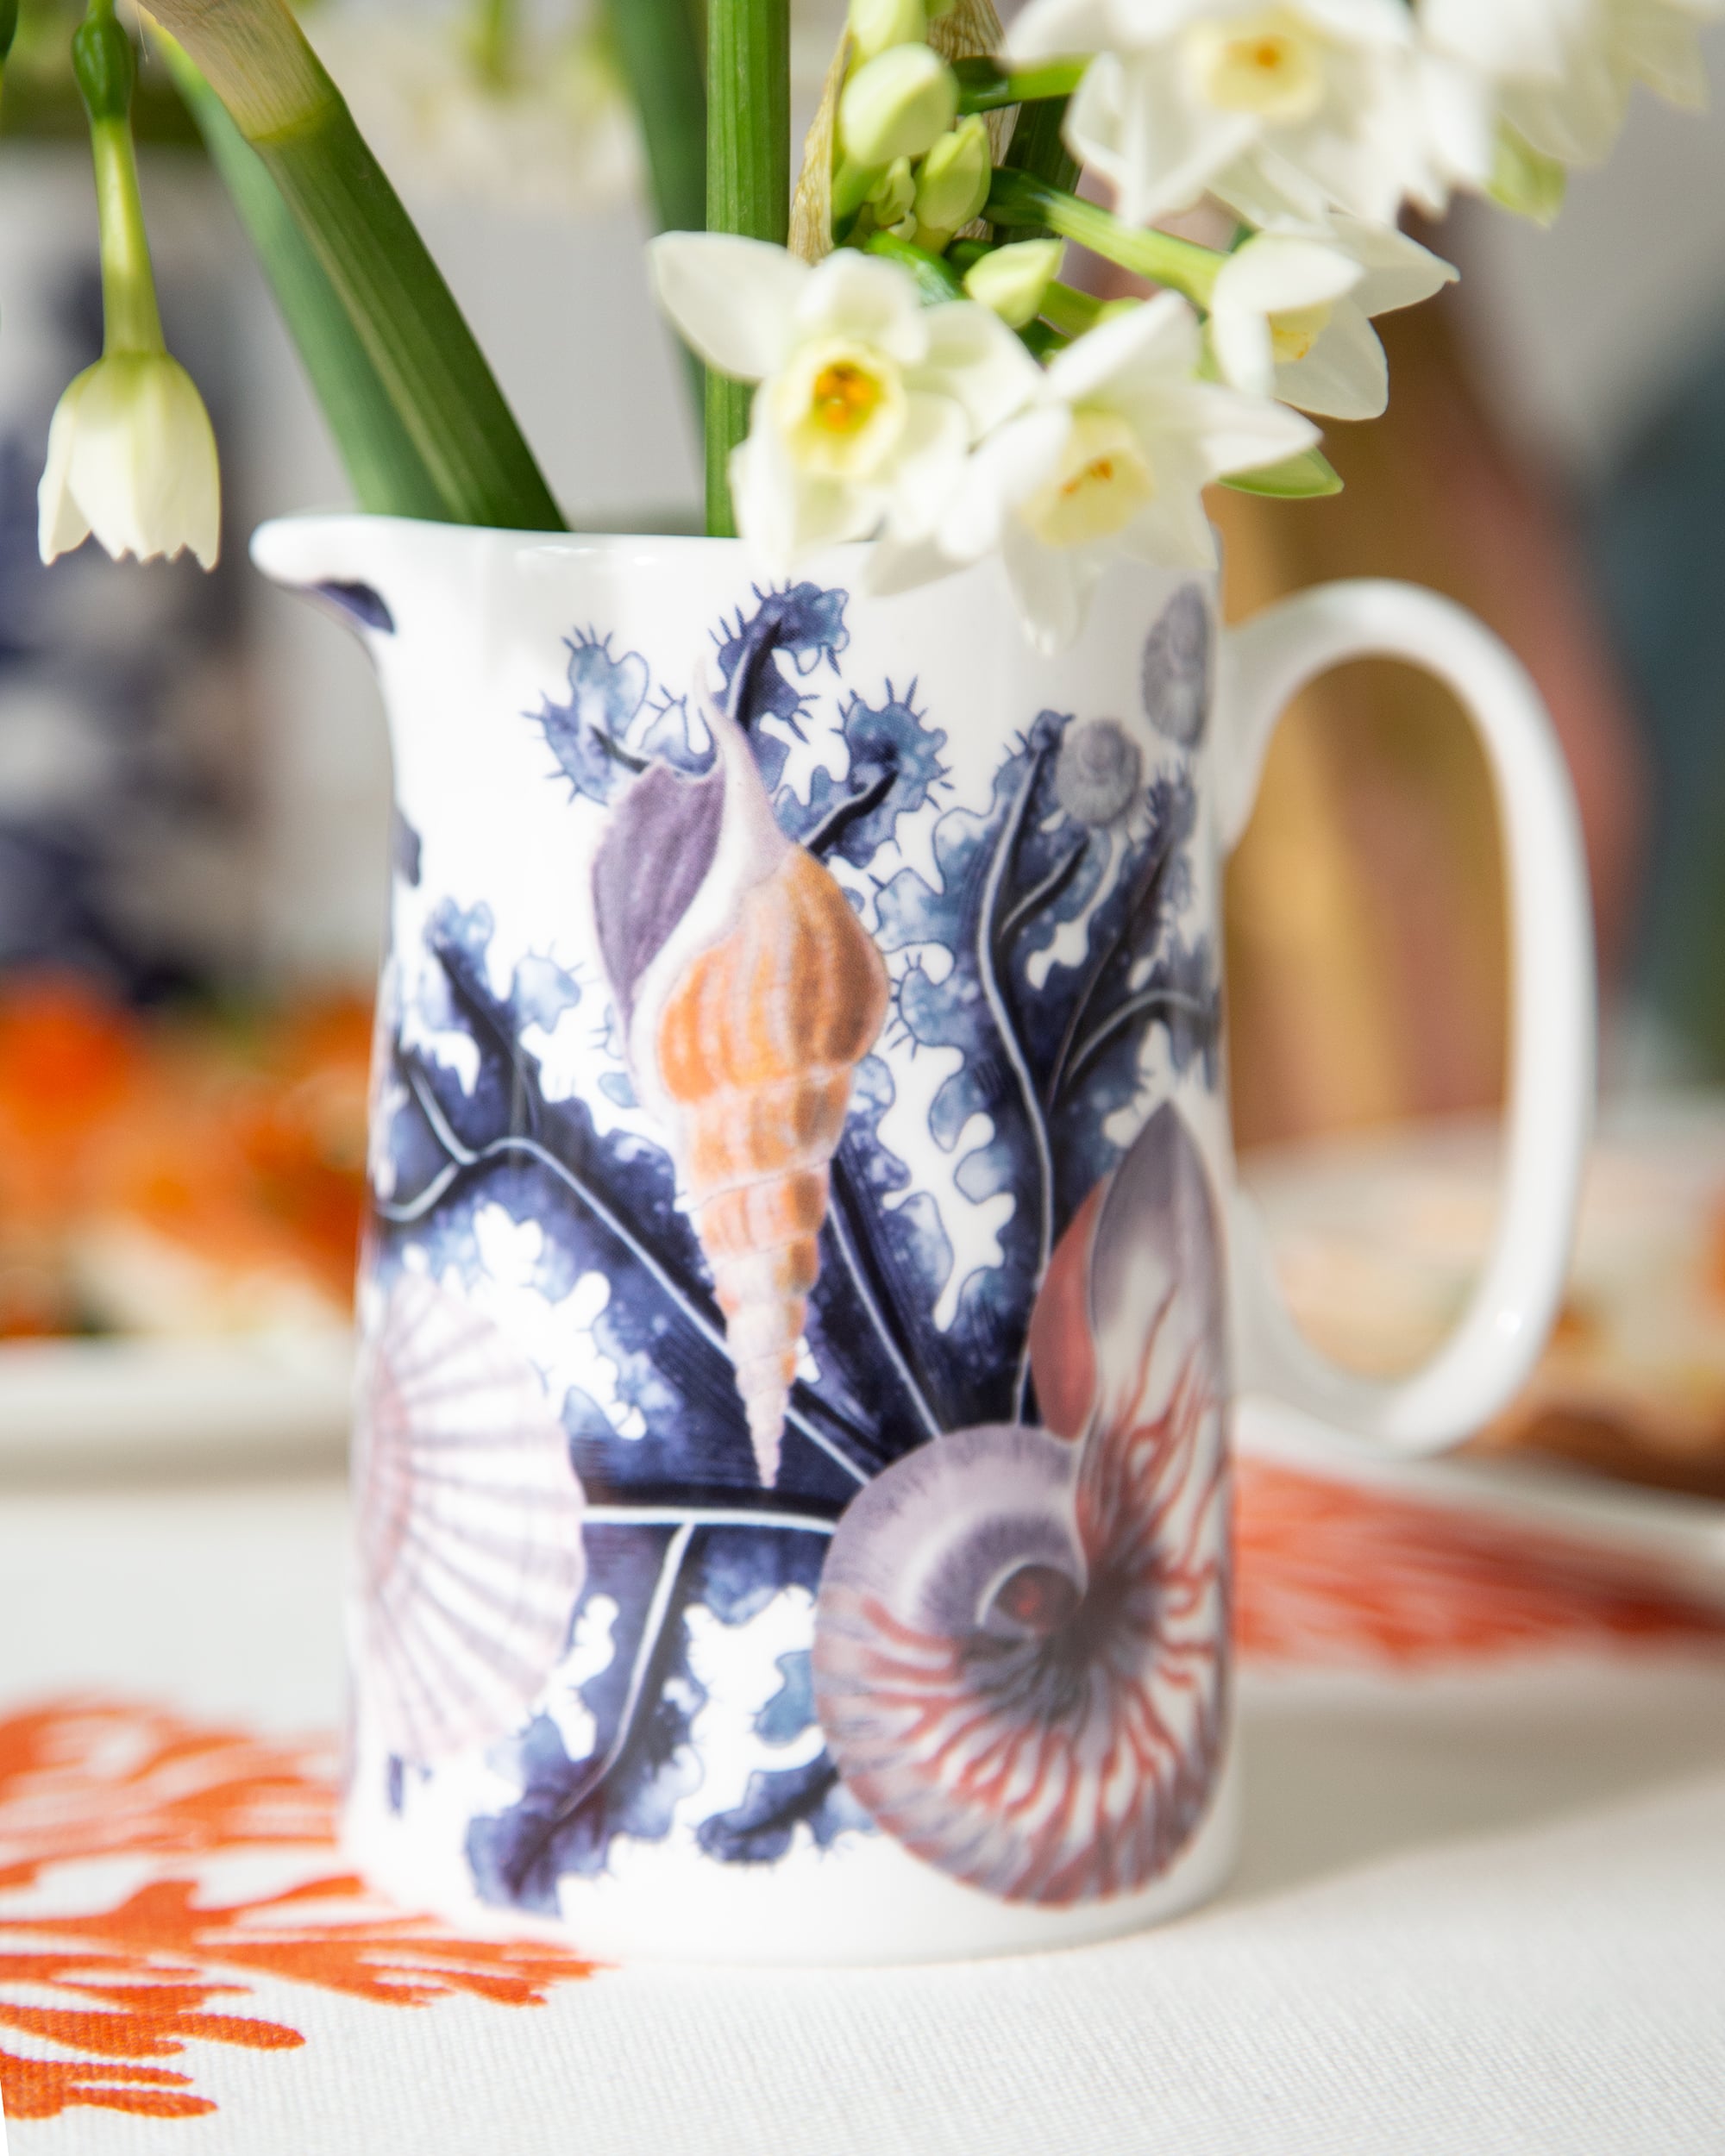 Close up of the Small size beachcomber jug showing blue seaweed, shells, scallops and a nautilus shell.In the jug are white daffodils with table decor in the background